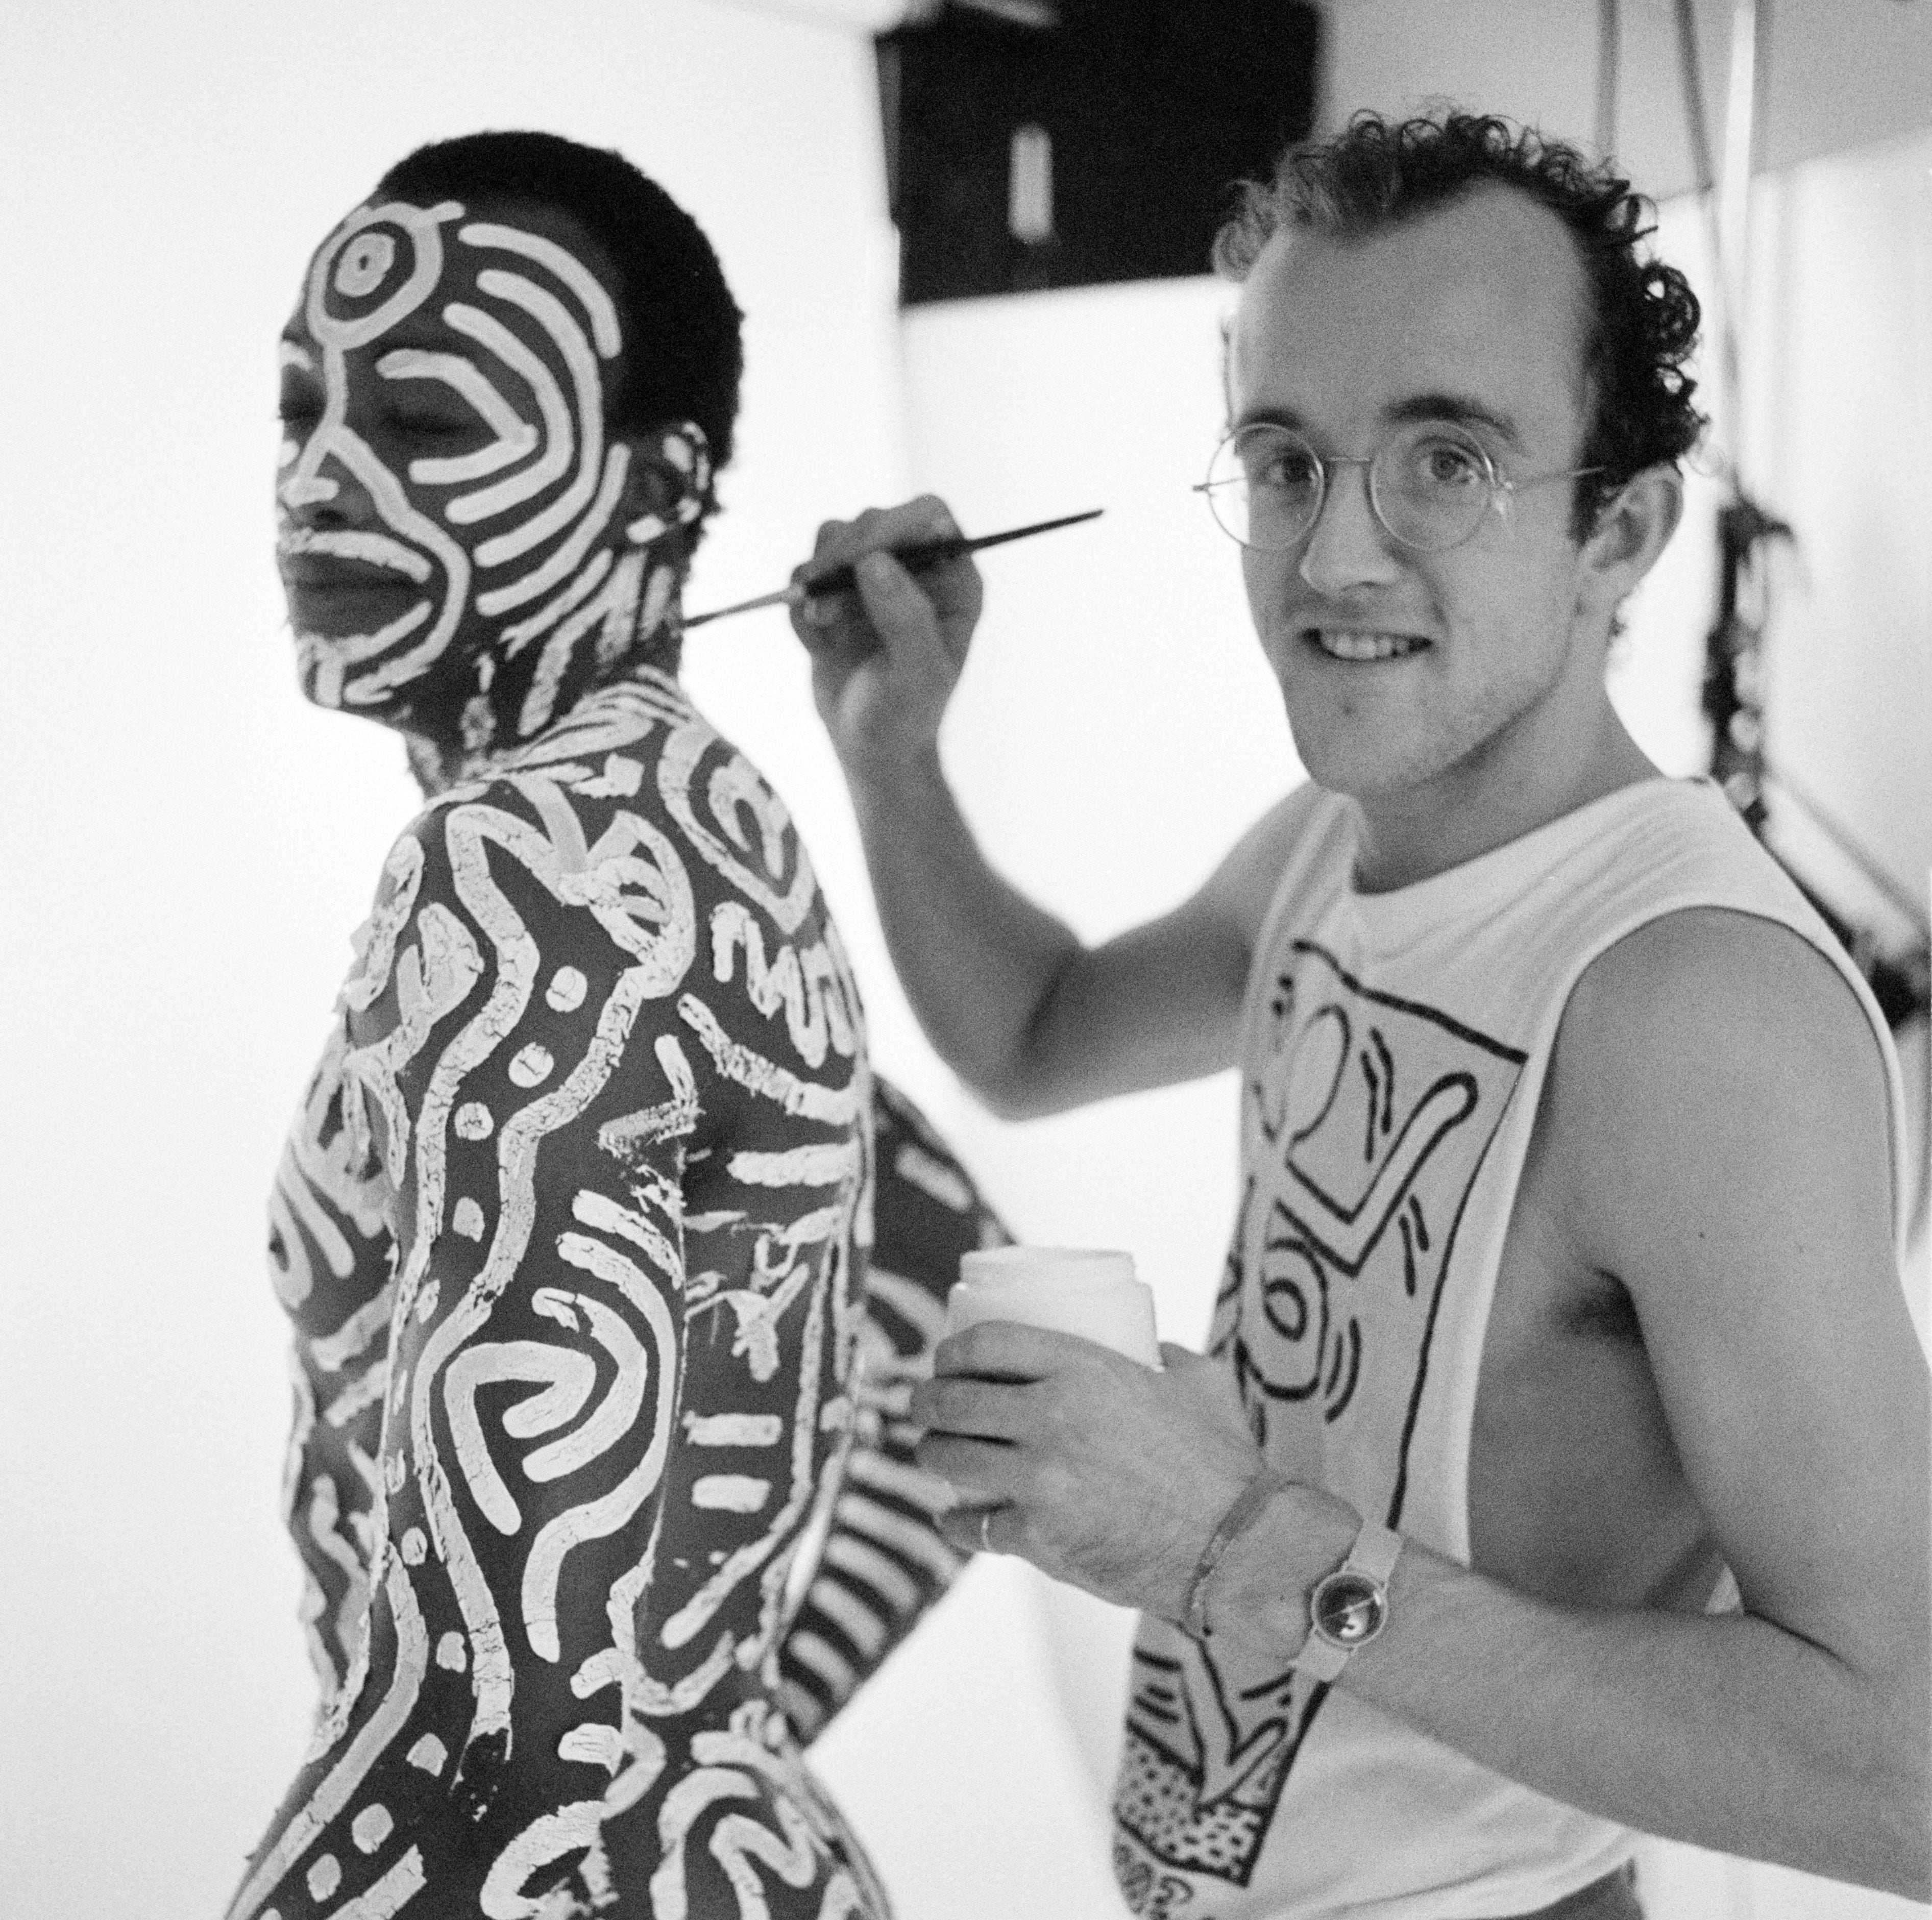 The Keith Haring renaissance: Almost four decades later, the iconic